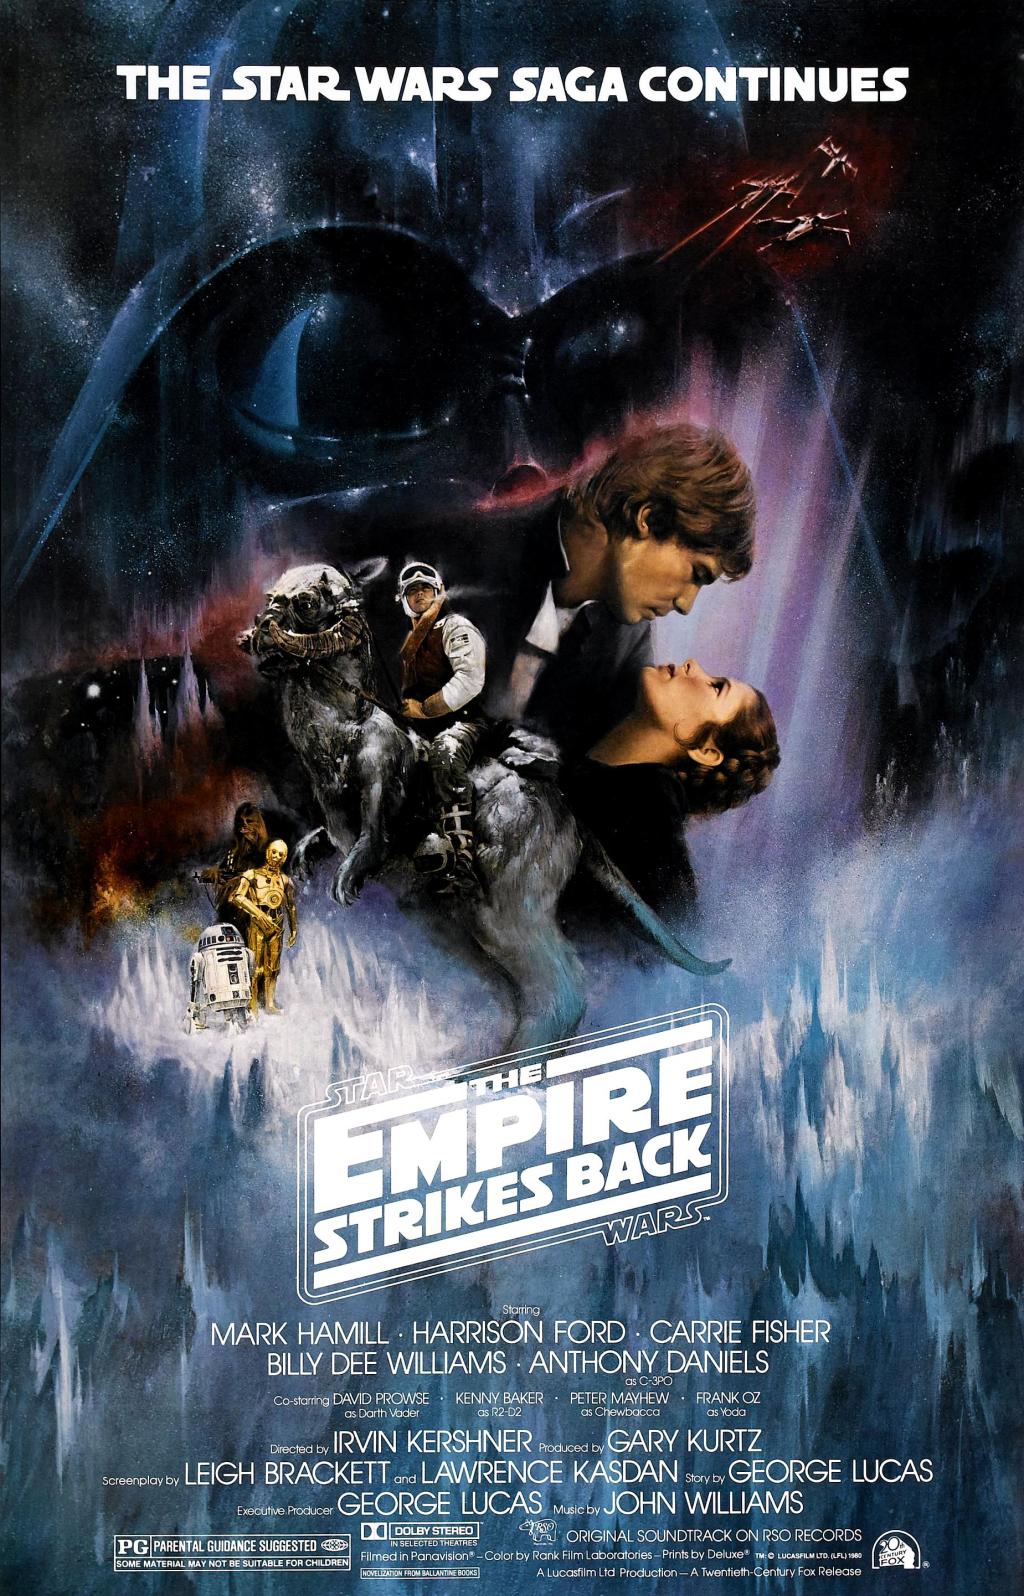 Star Wars: Episode 5 – The Empire Strikes Back